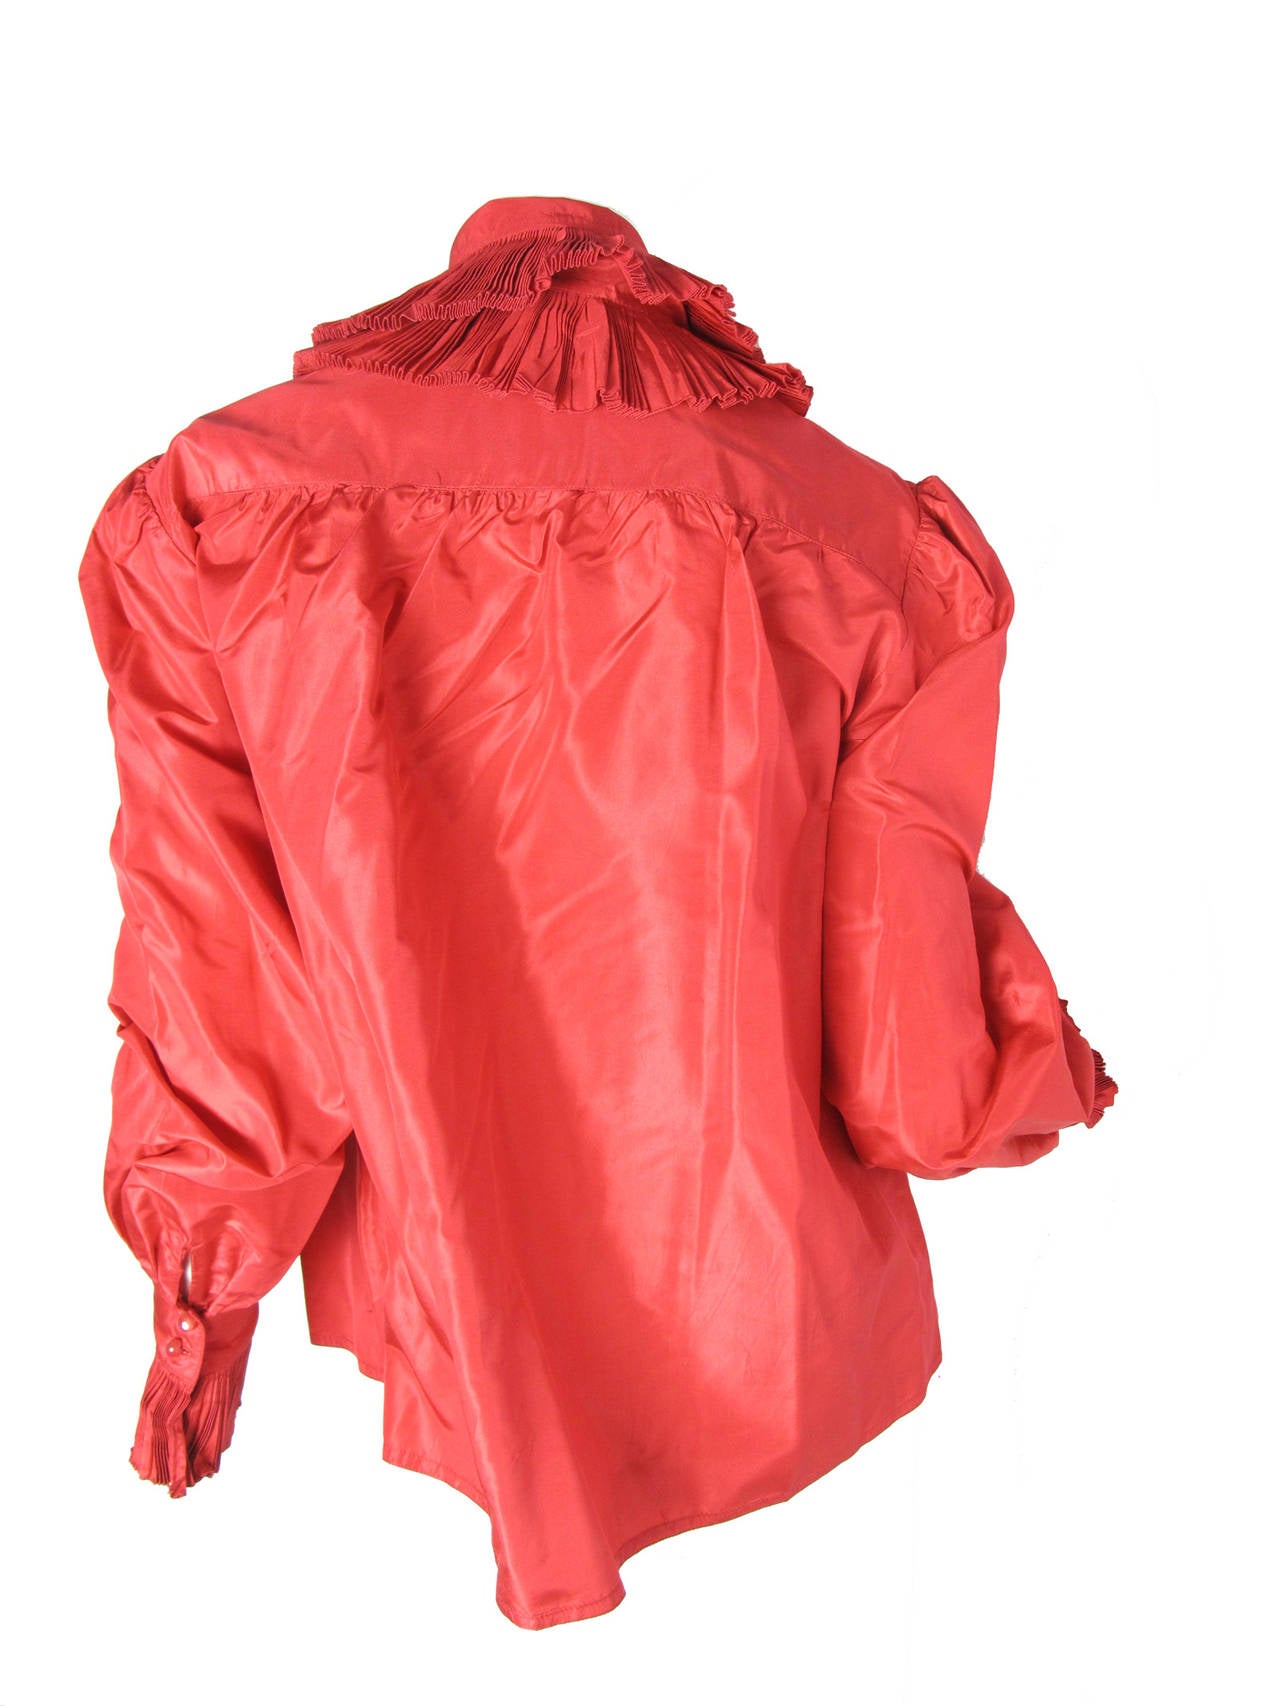 Red 1980s Chloe red silk blouse with ruffled cuffs and collar